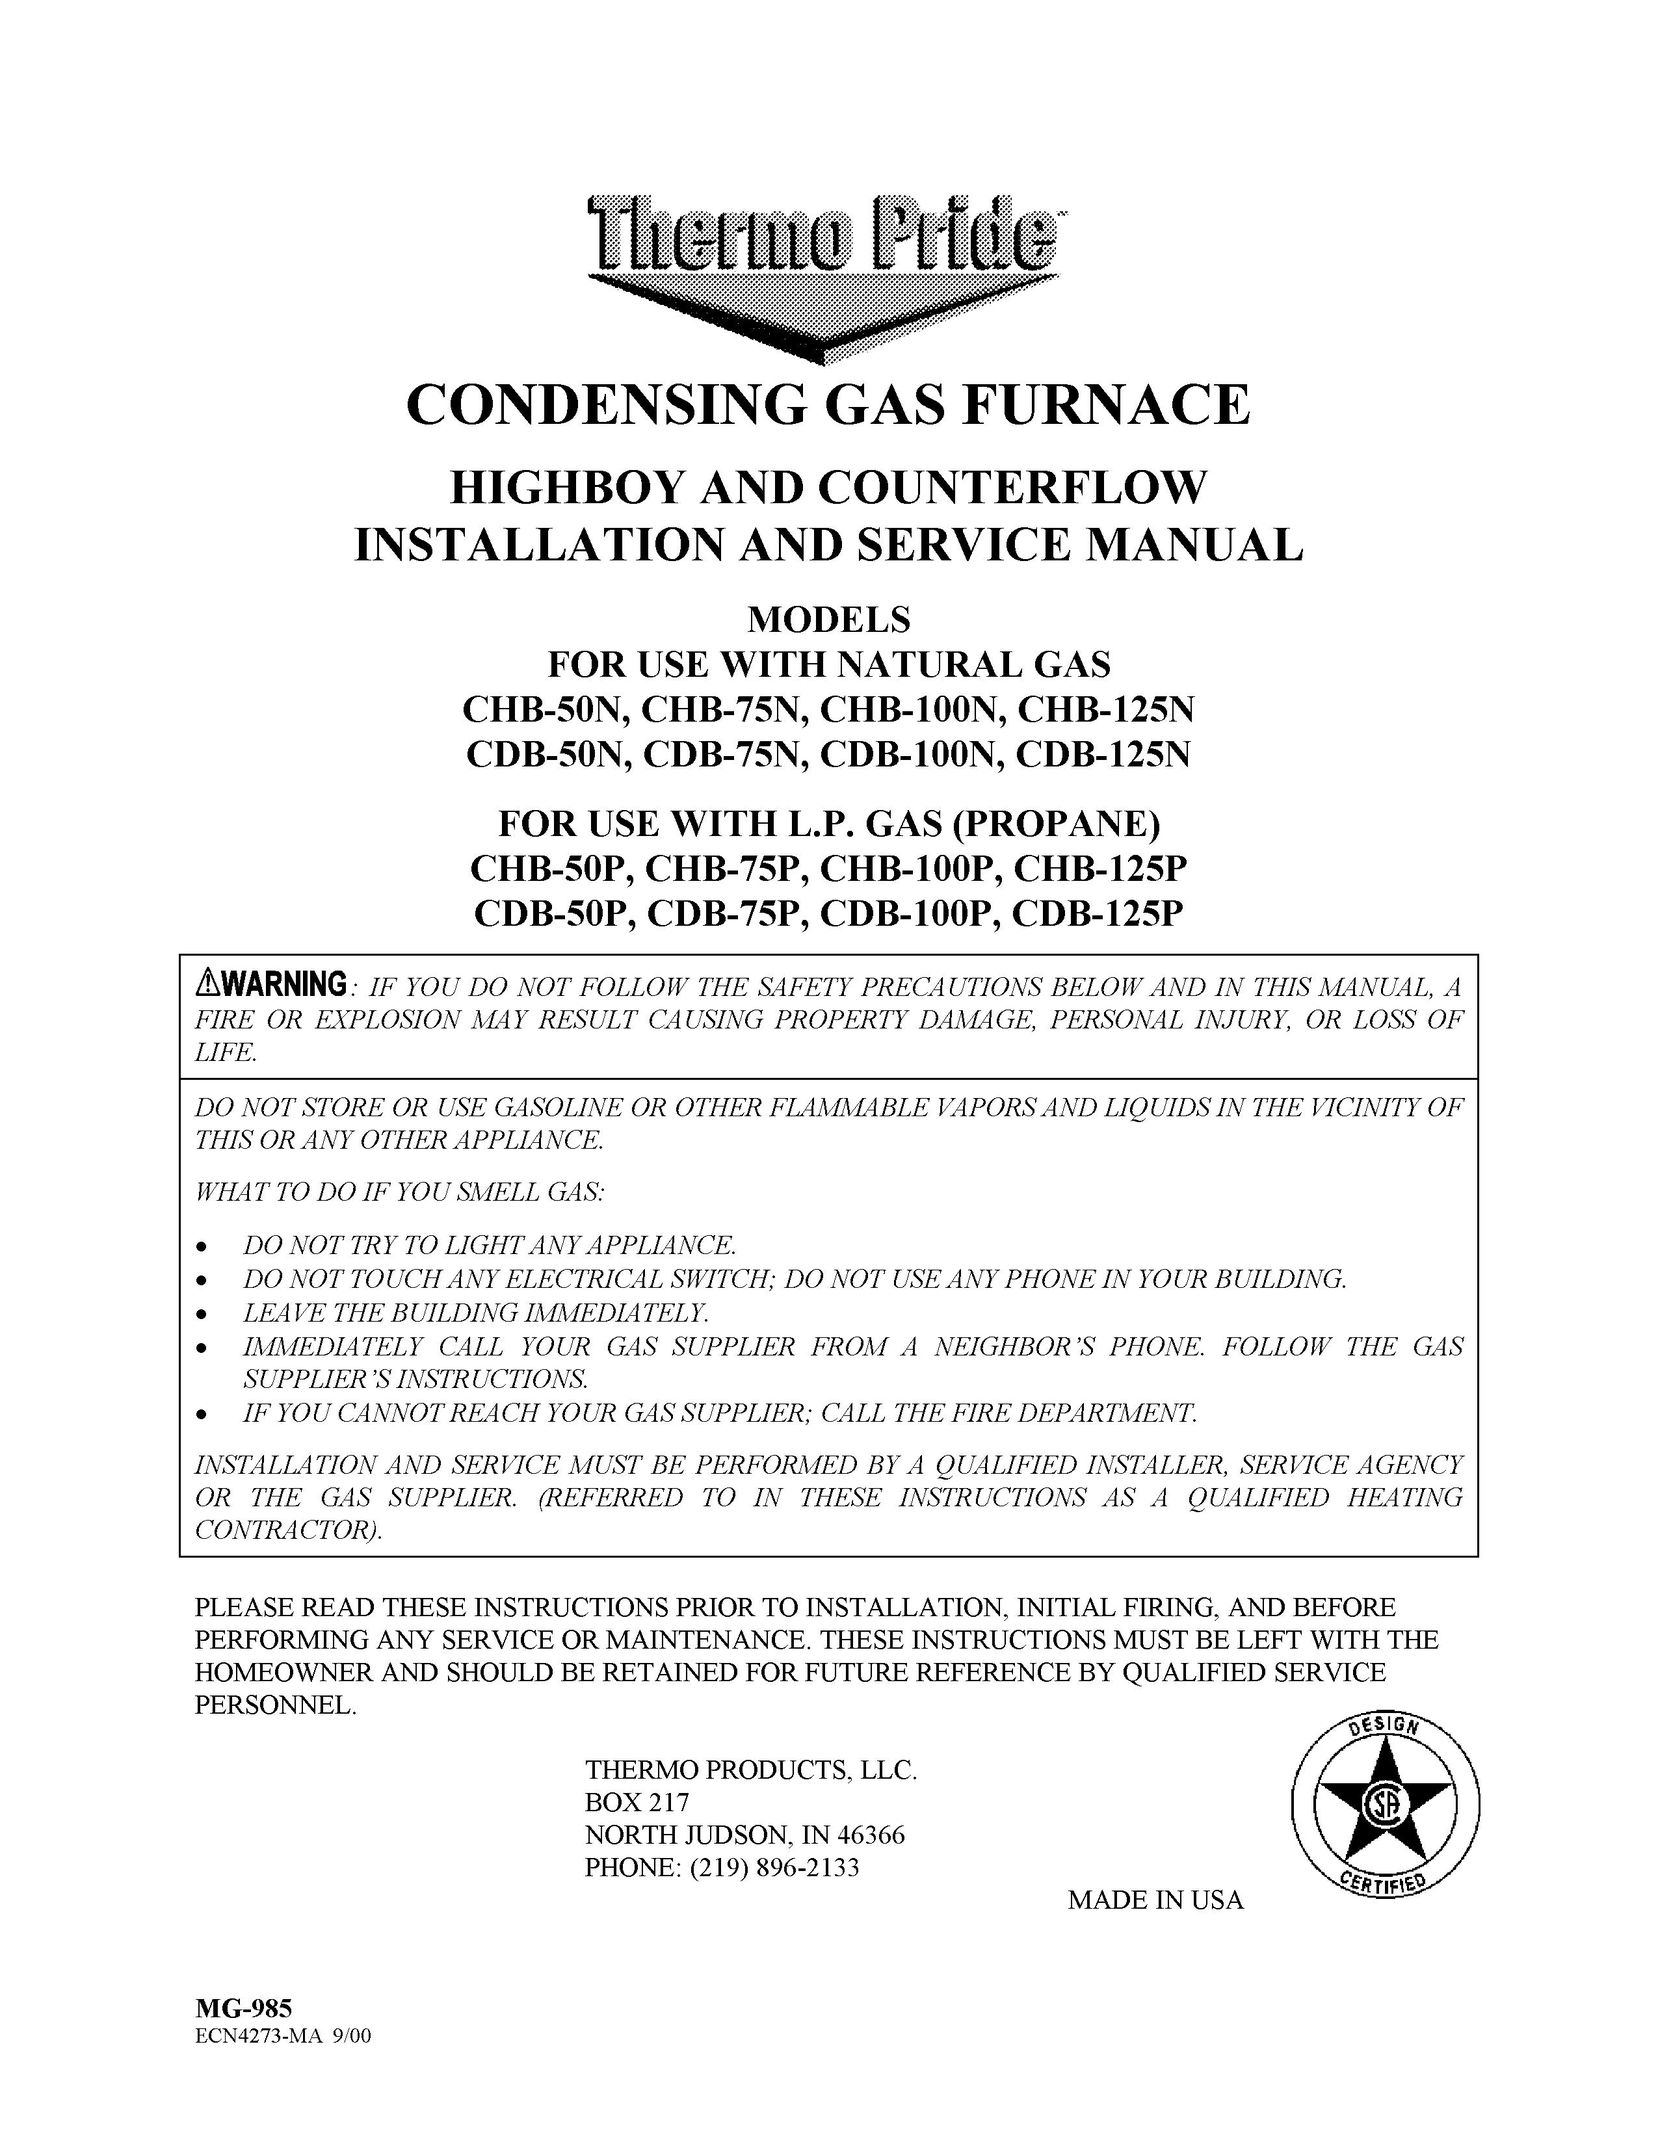 Thermo Products CDB-100N Furnace User Manual